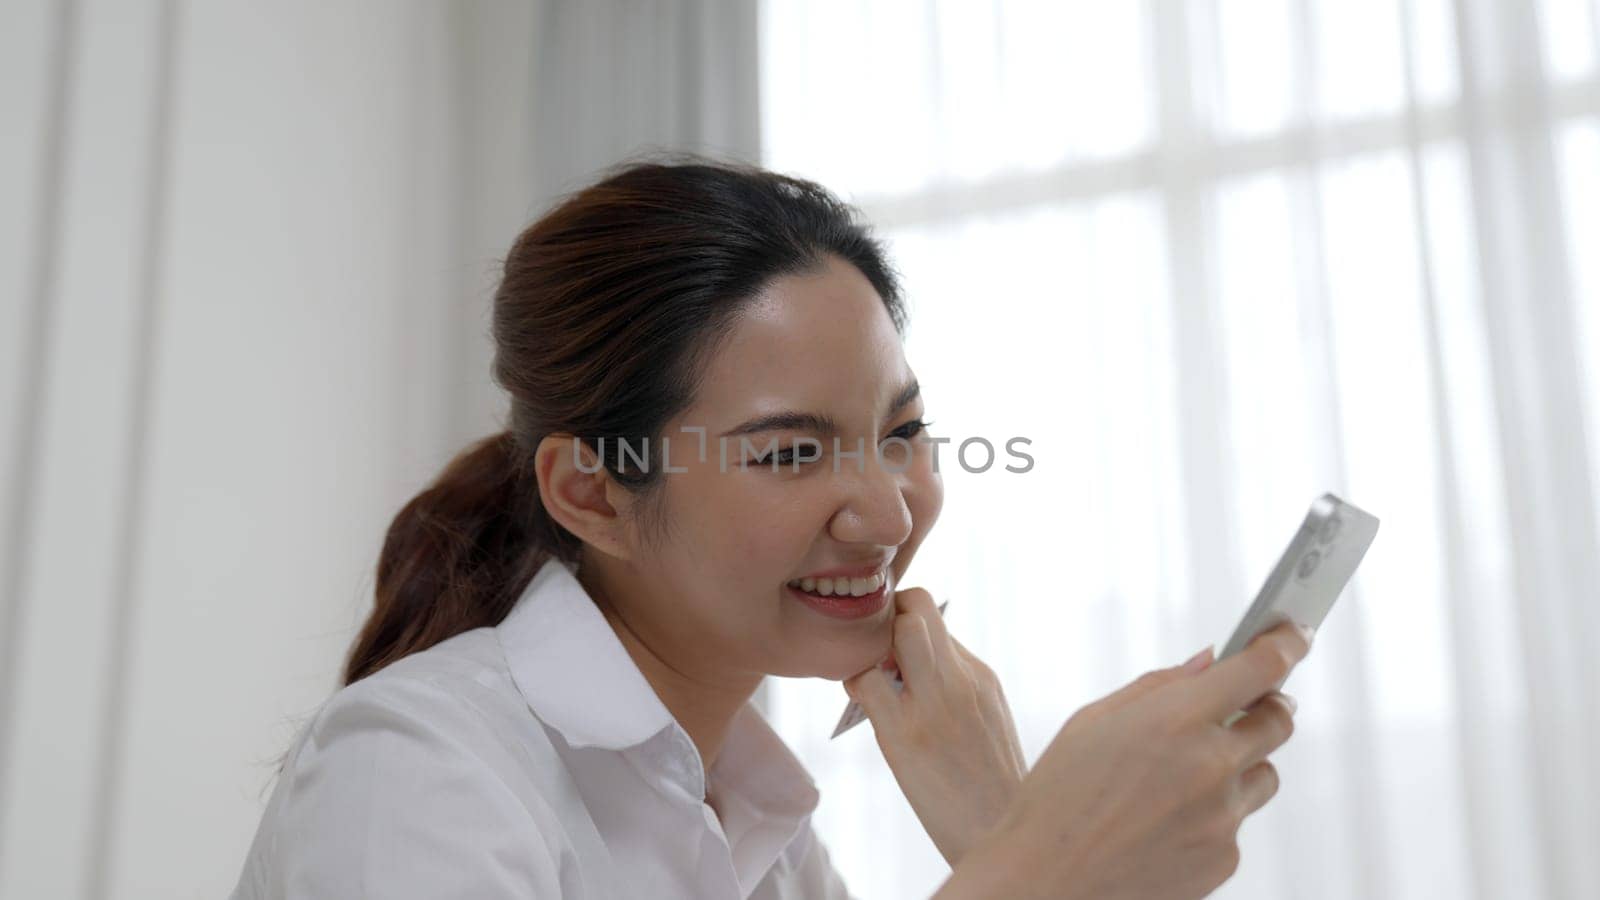 Young woman using smartphone browsing for online shopping E commerce by online payment gateway at vivancy home. Modern and convenience online purchasing make secure and convenient purchases.